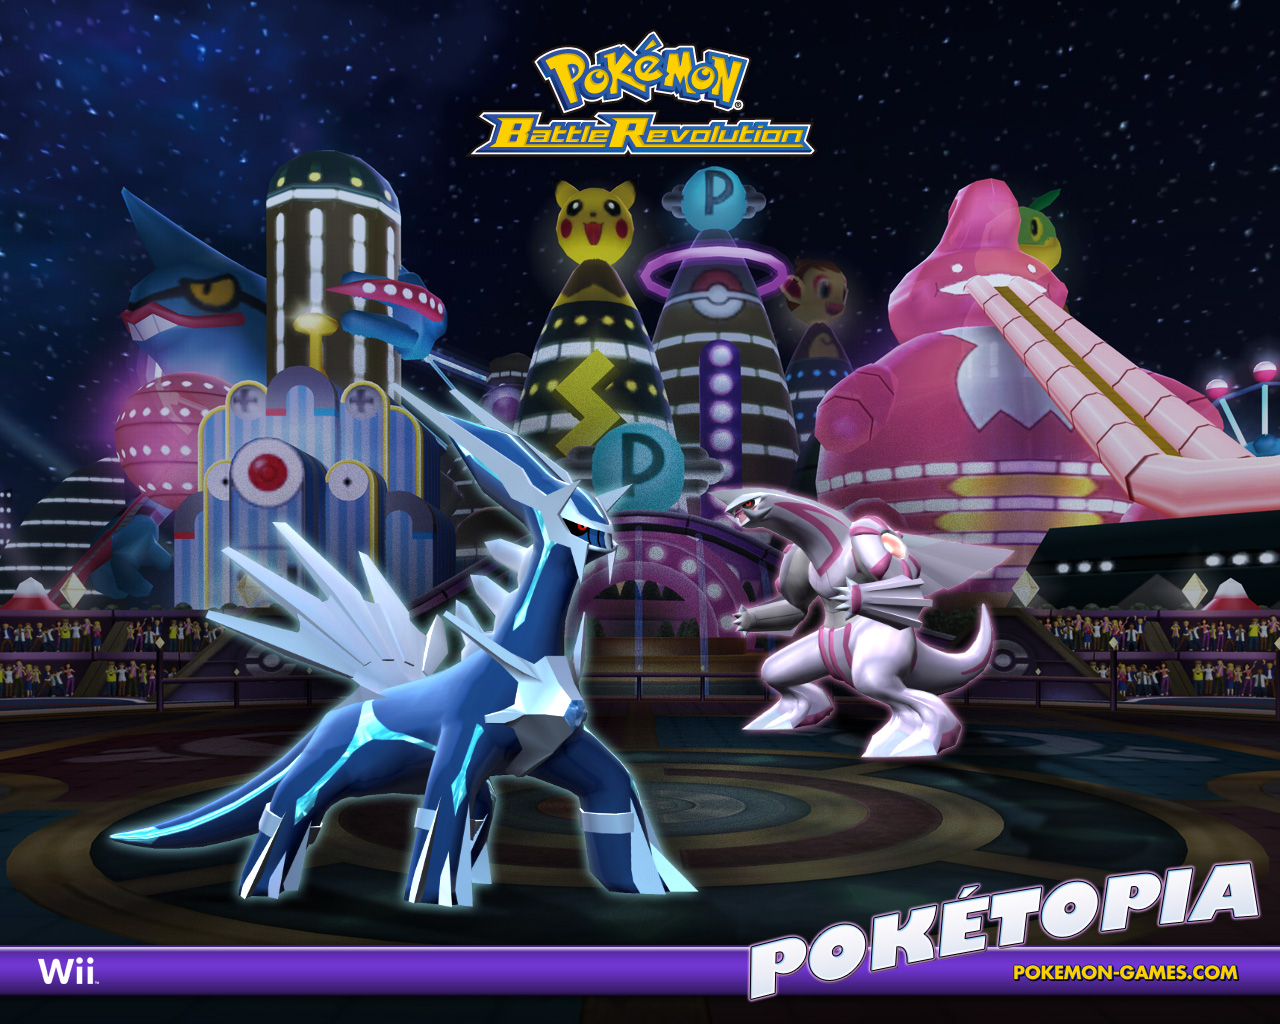 Pokemon Battle Revolution for the Nintendo Wii takes place on an island 